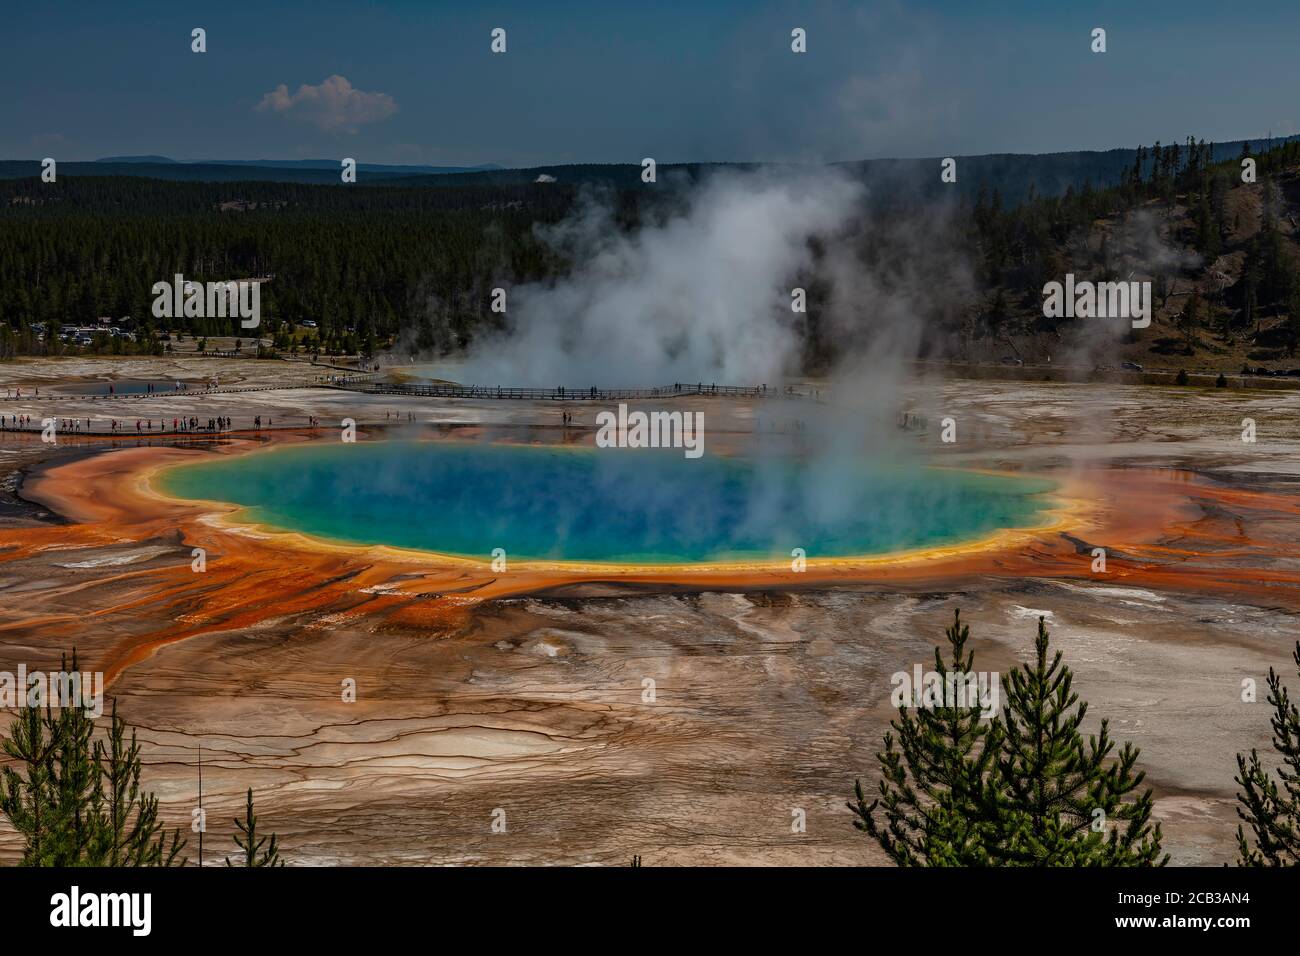 The Grand Prismatic Spring of Yellowstone National Park as seen from the overlook platform Stock Photo